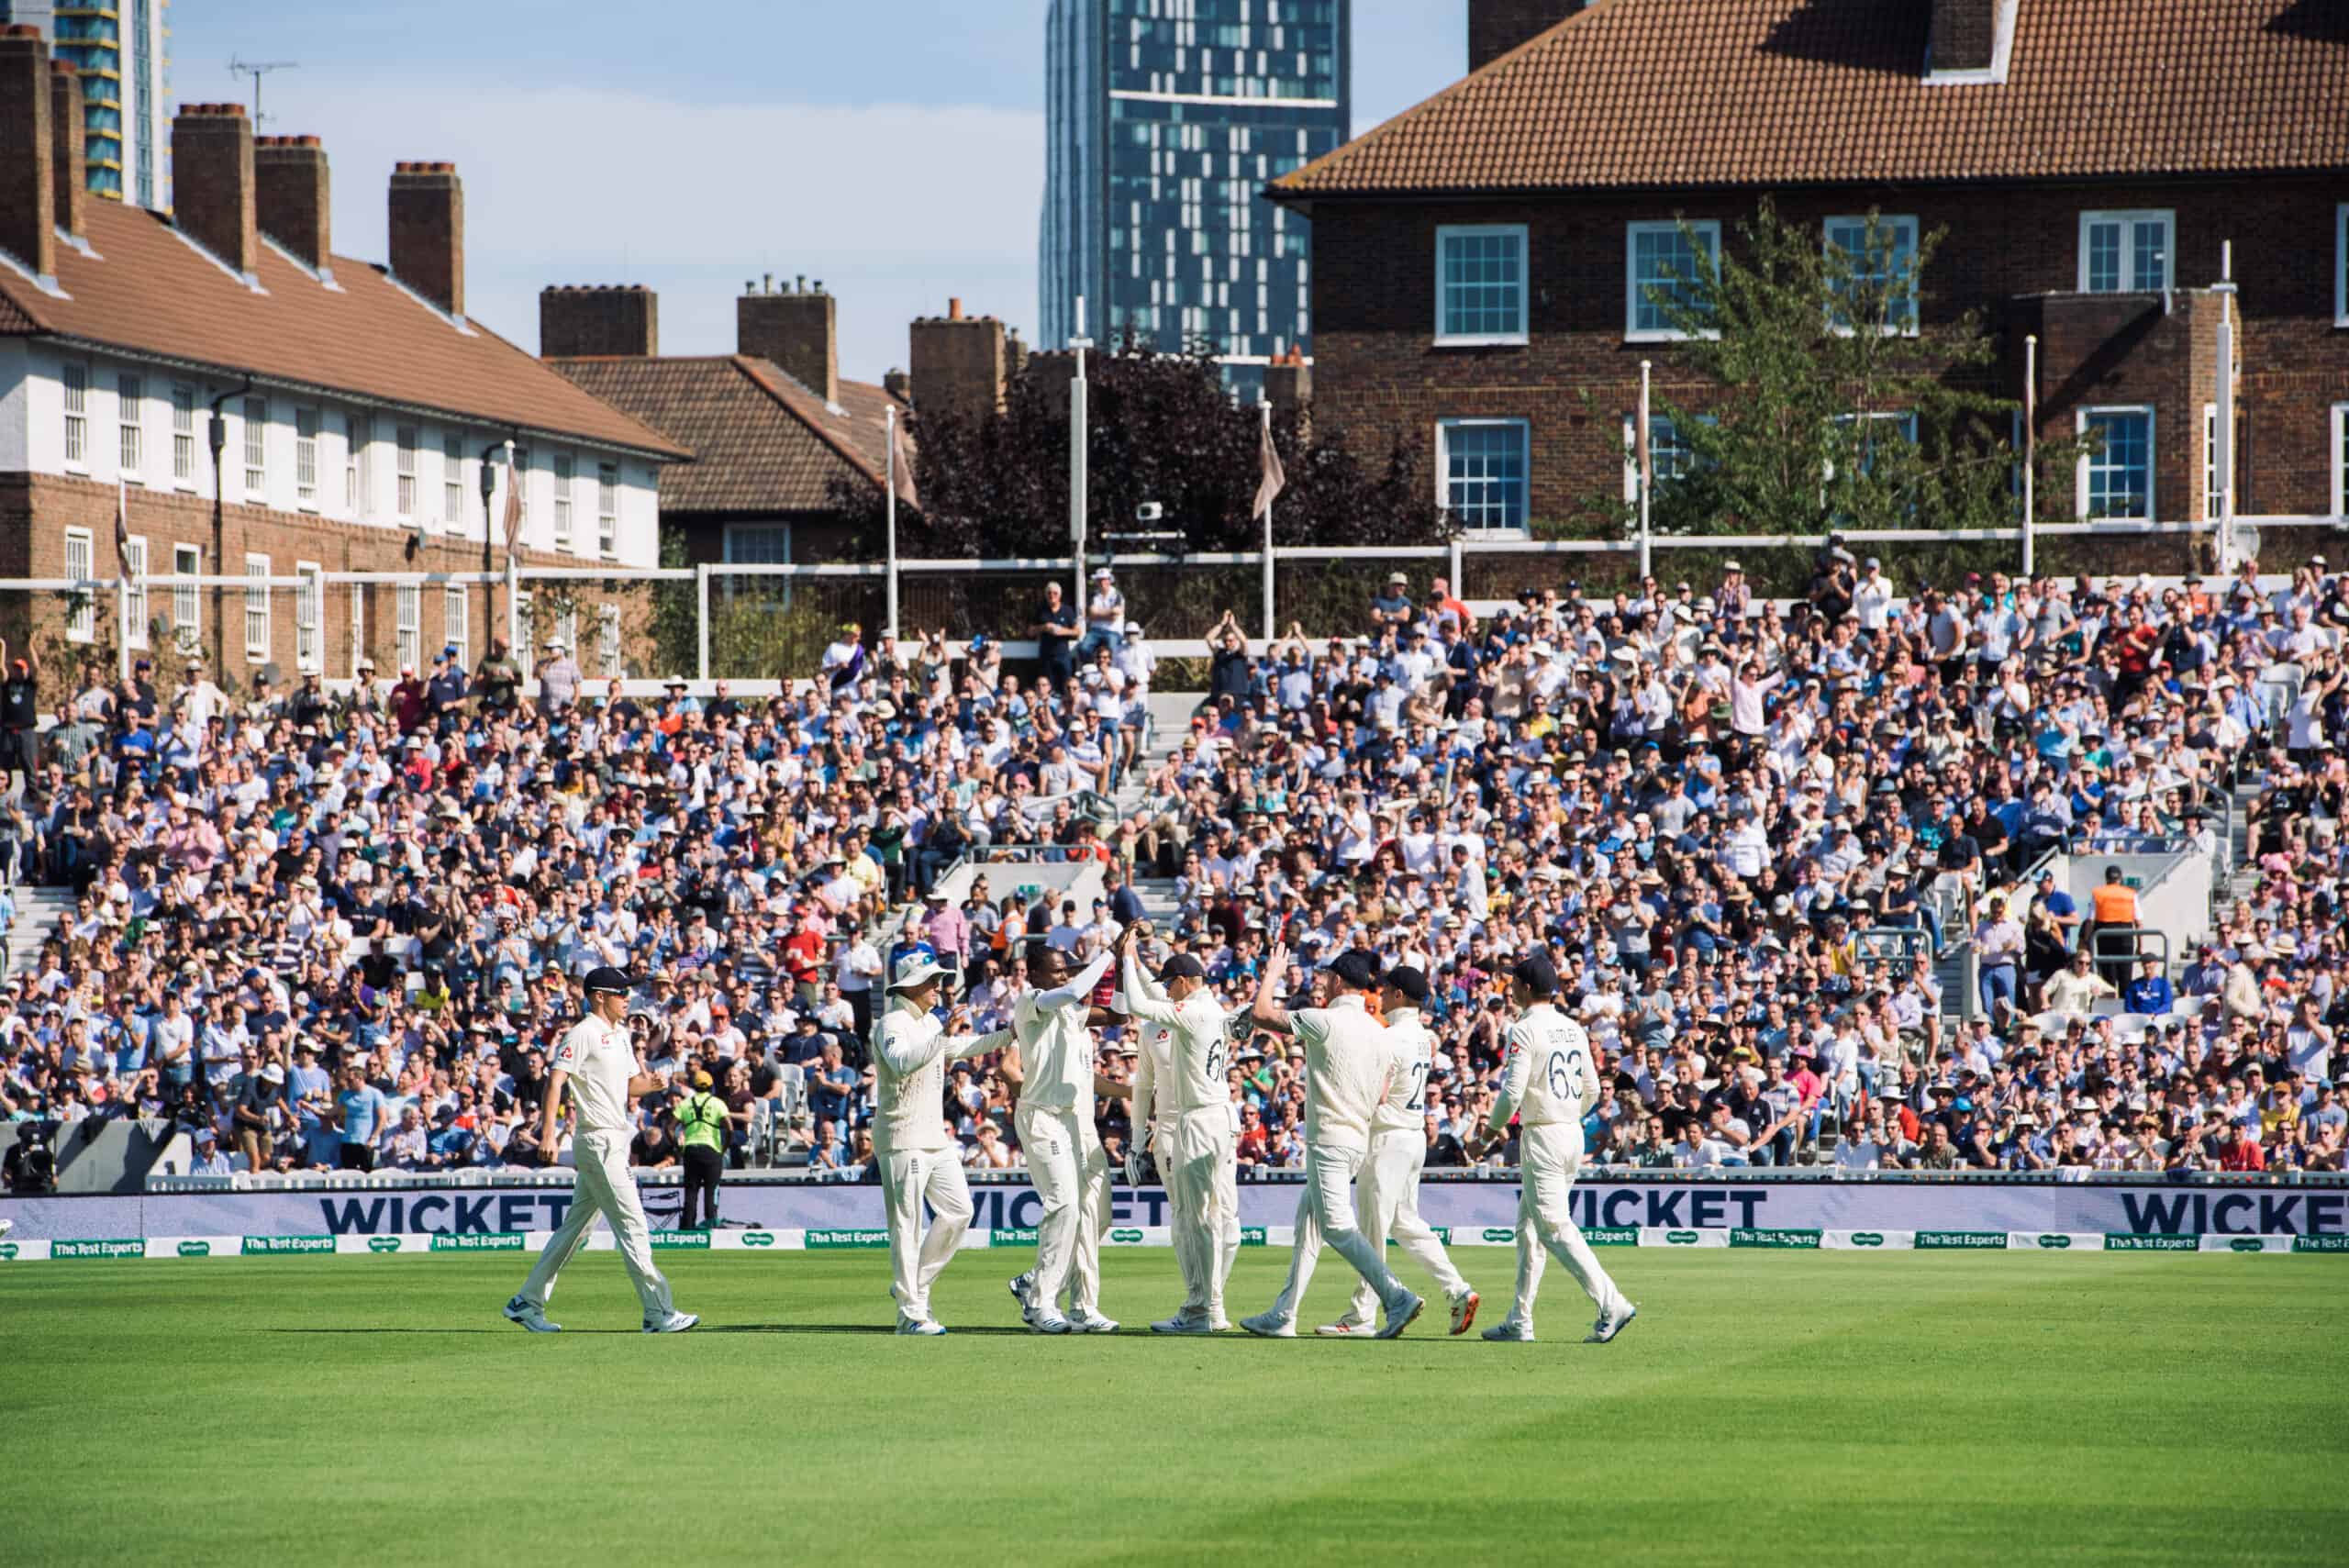 The Oval Test Match